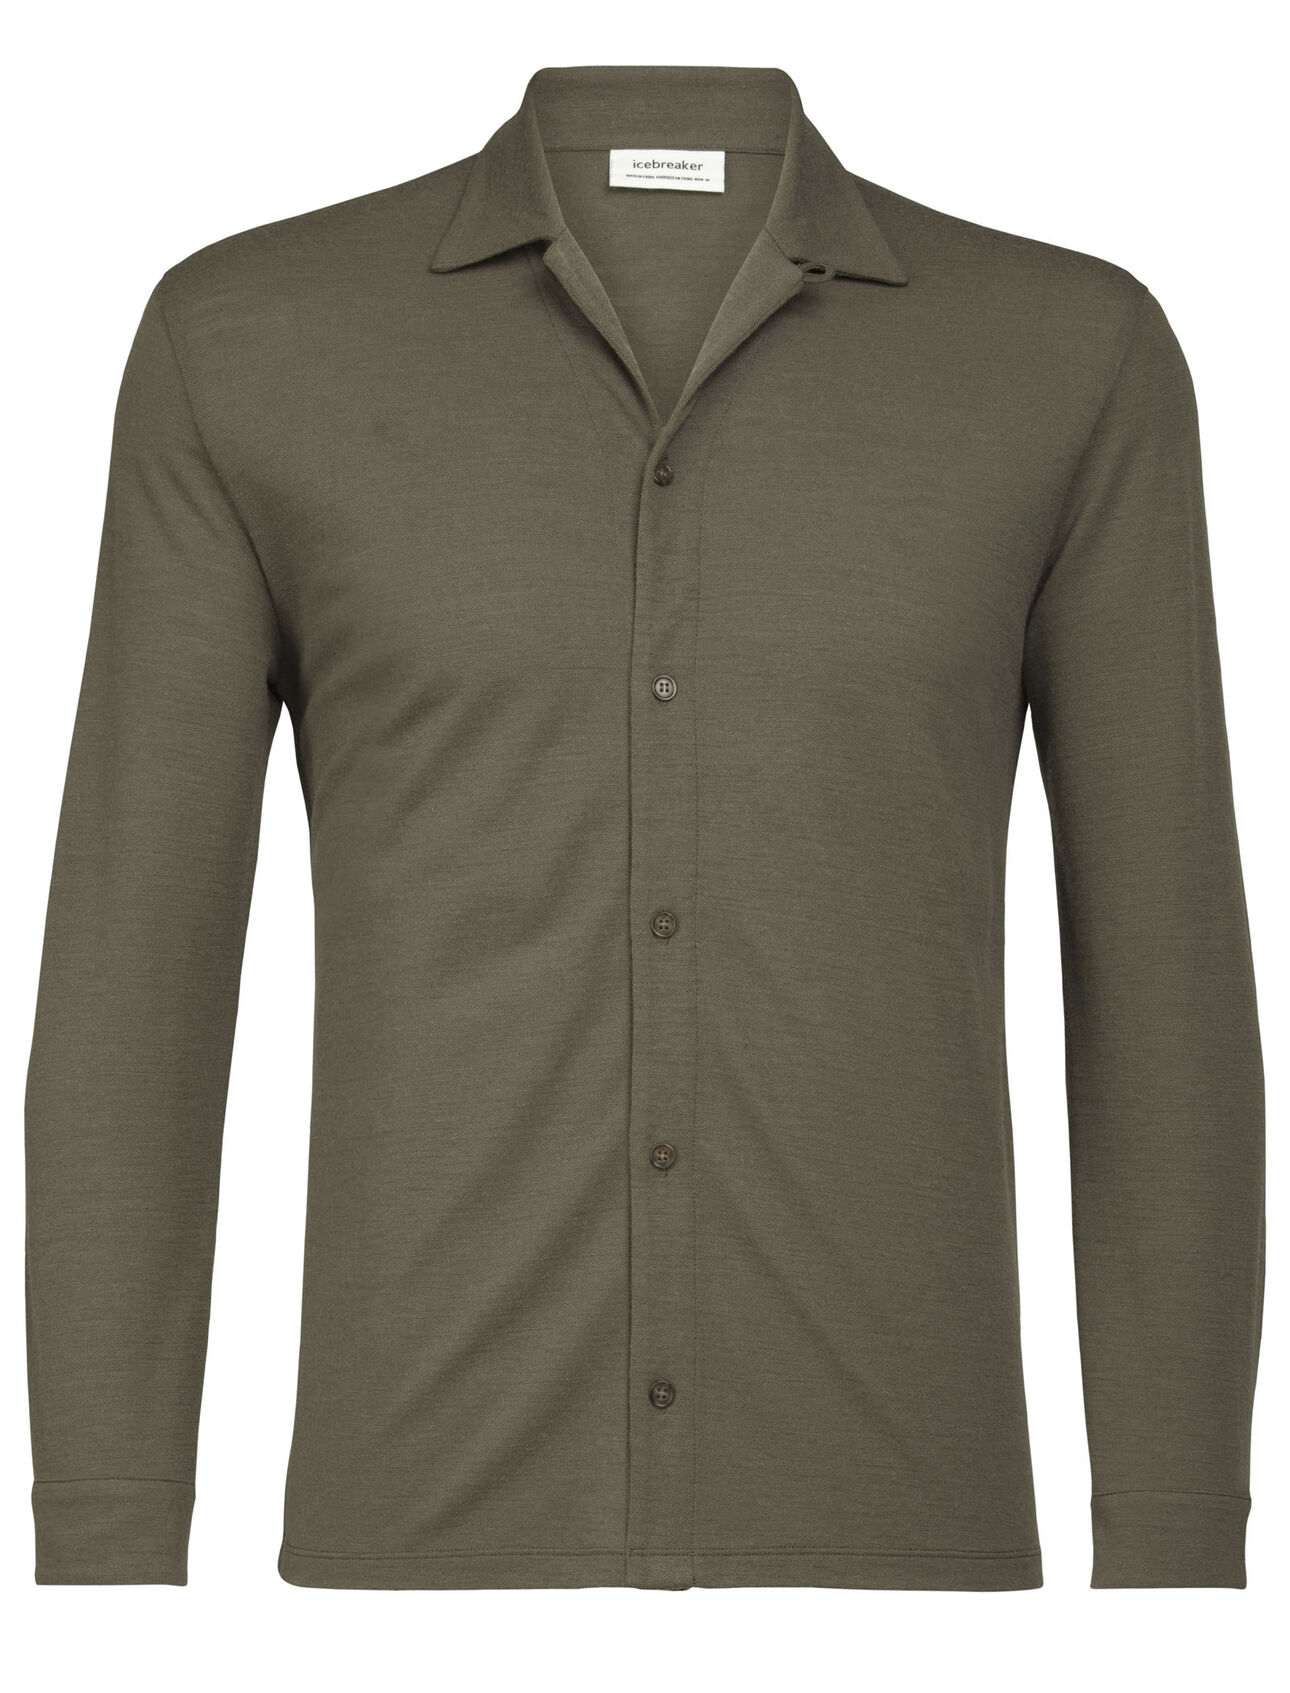 Mens Merino Pique Long Sleeve Shirt A lightweight, 100% merino top with a classic button-front silhouette, the Merino Pique Long Sleeve Shirt is reliable, stylish and full of everyday comfort.